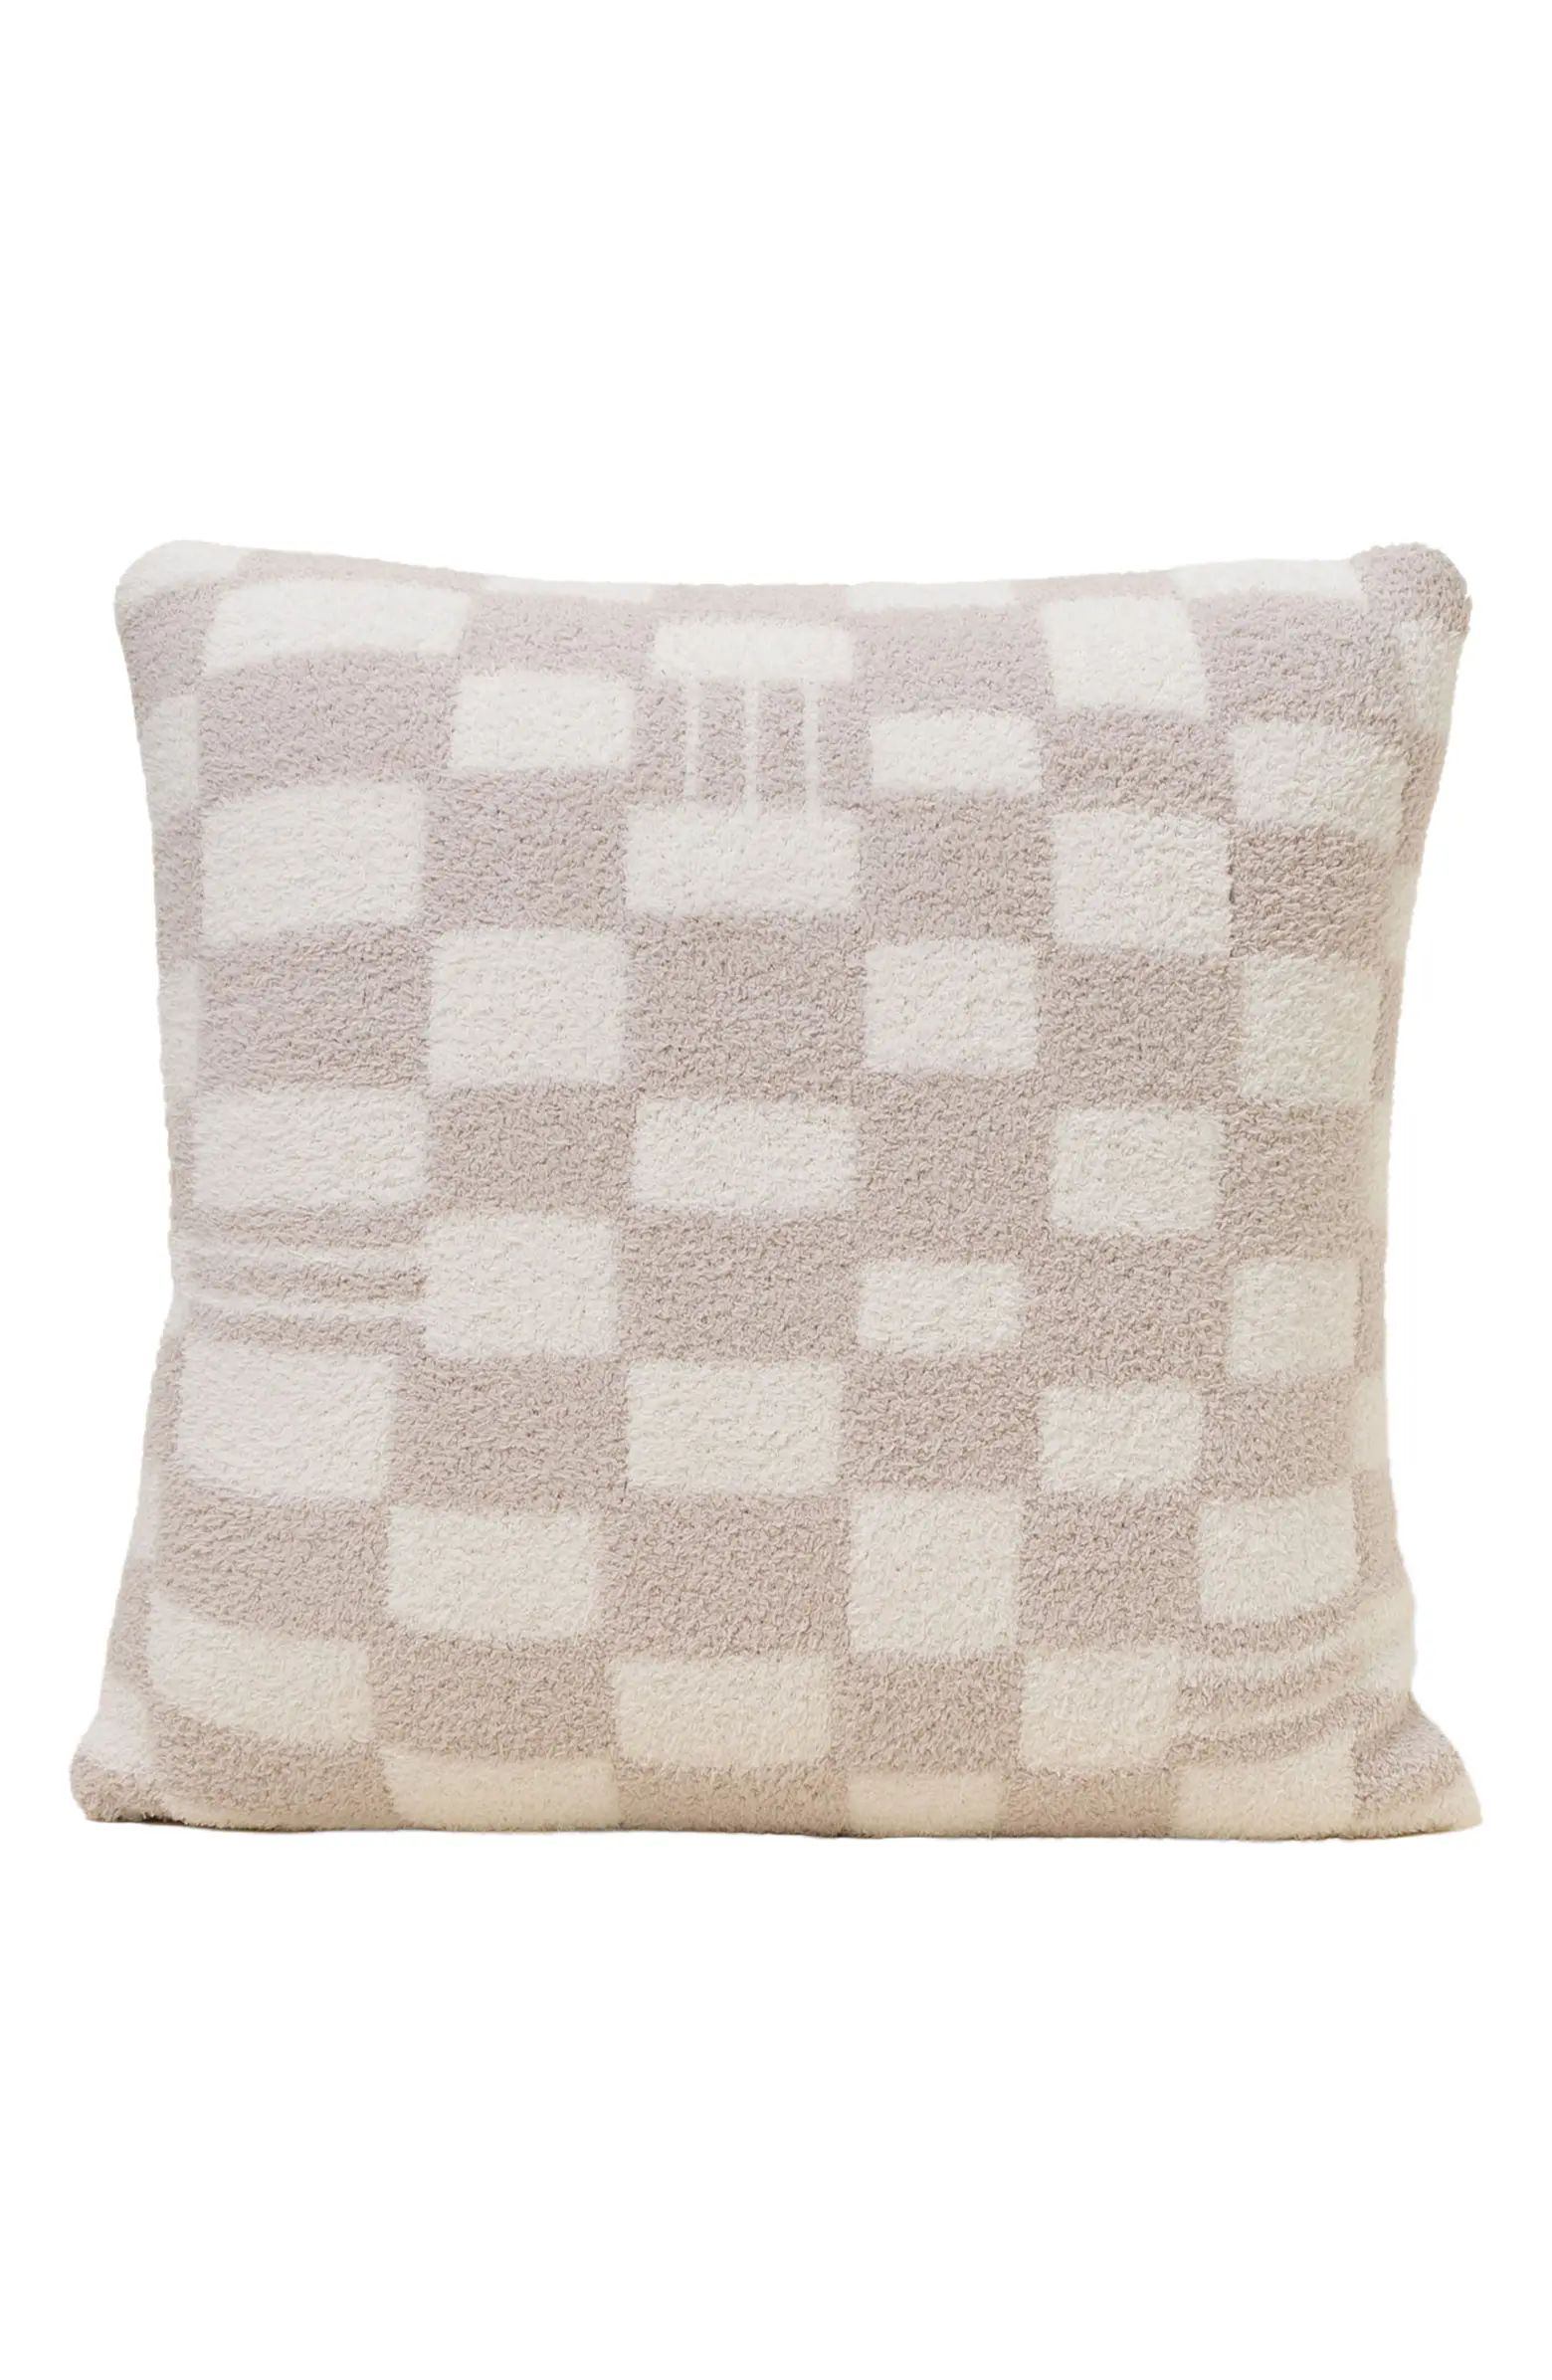 Barefoot Dreams® CozyChic® Checks & Stripes Accent Pillow | Nordstrom | Nordstrom